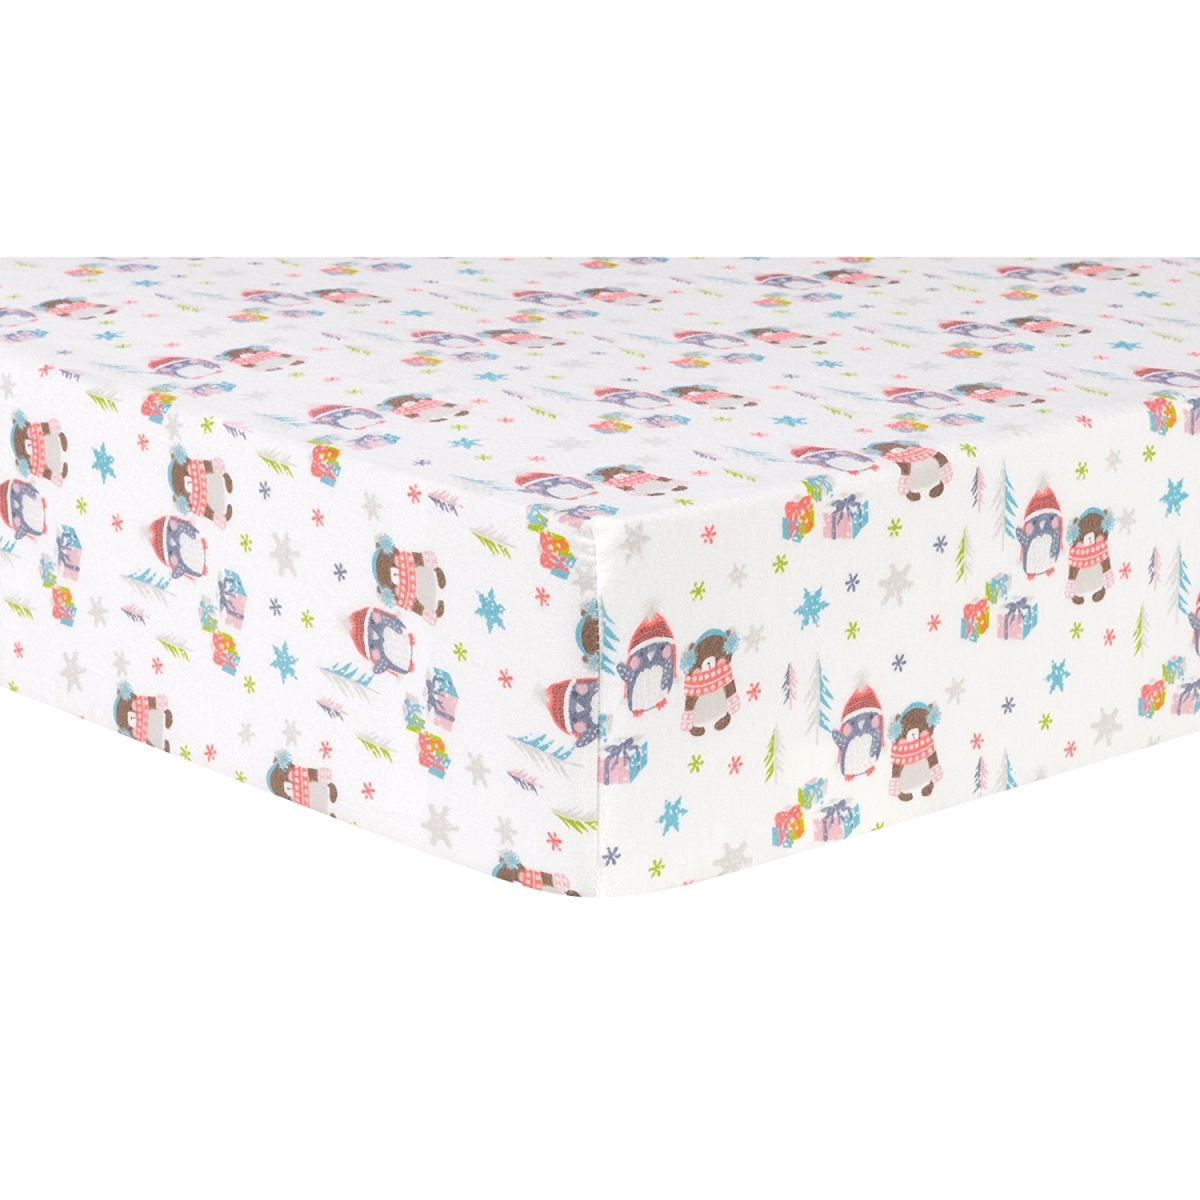 102728 Whim-g Winter Wishes Deluxe Flannel Fitted Crib Sheet - Gray, Green, Pink & White